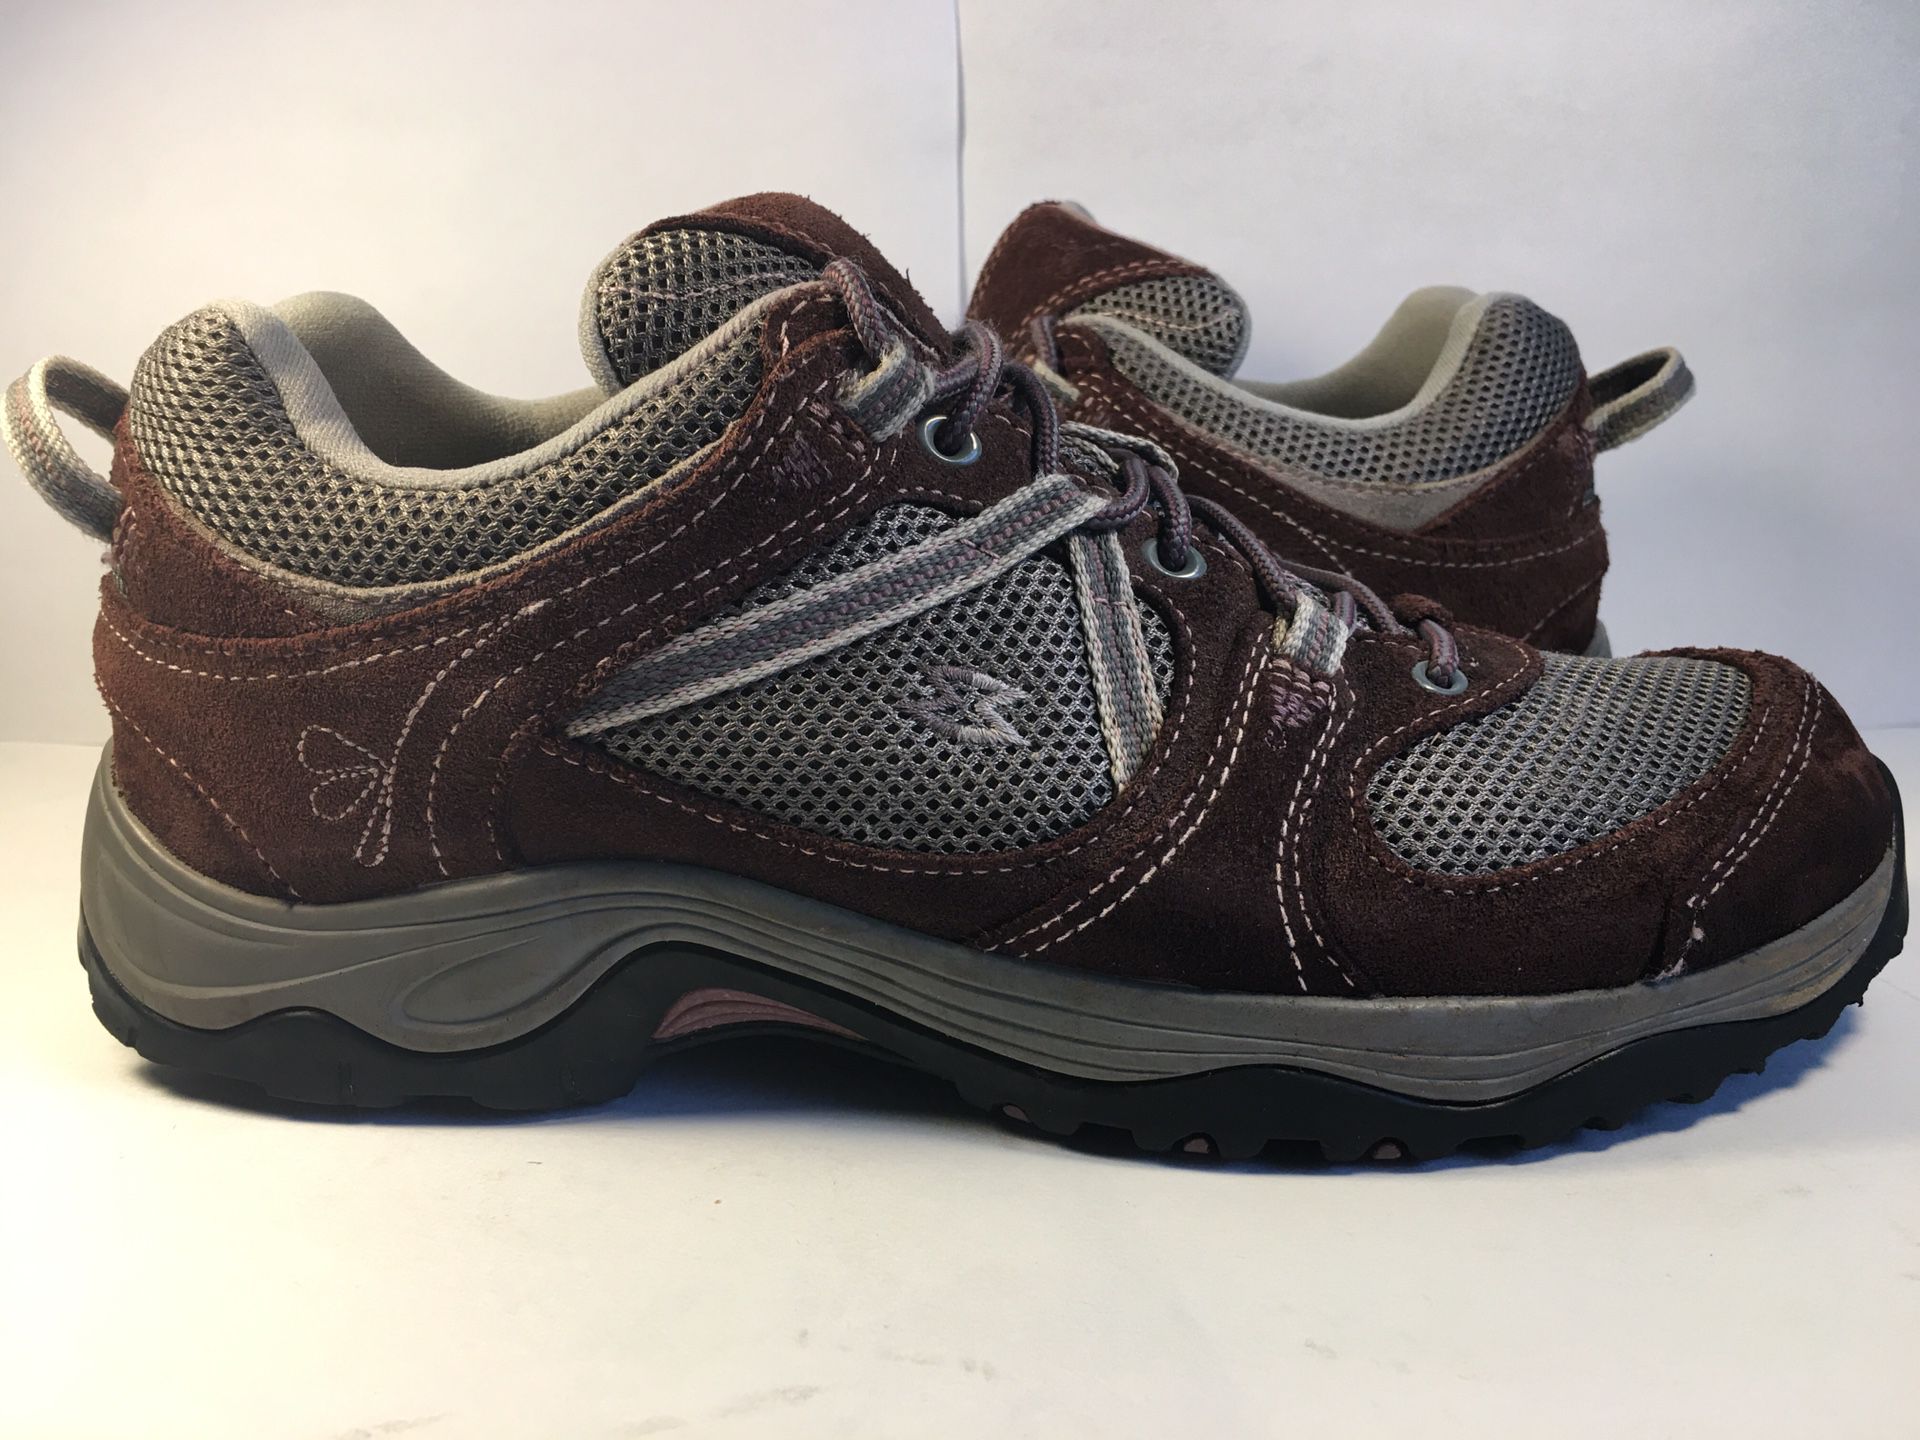 Garmont Backpacking-Hiking-Trail Shoes Womens Size 9M Maroon-Silver Suede-Mesh